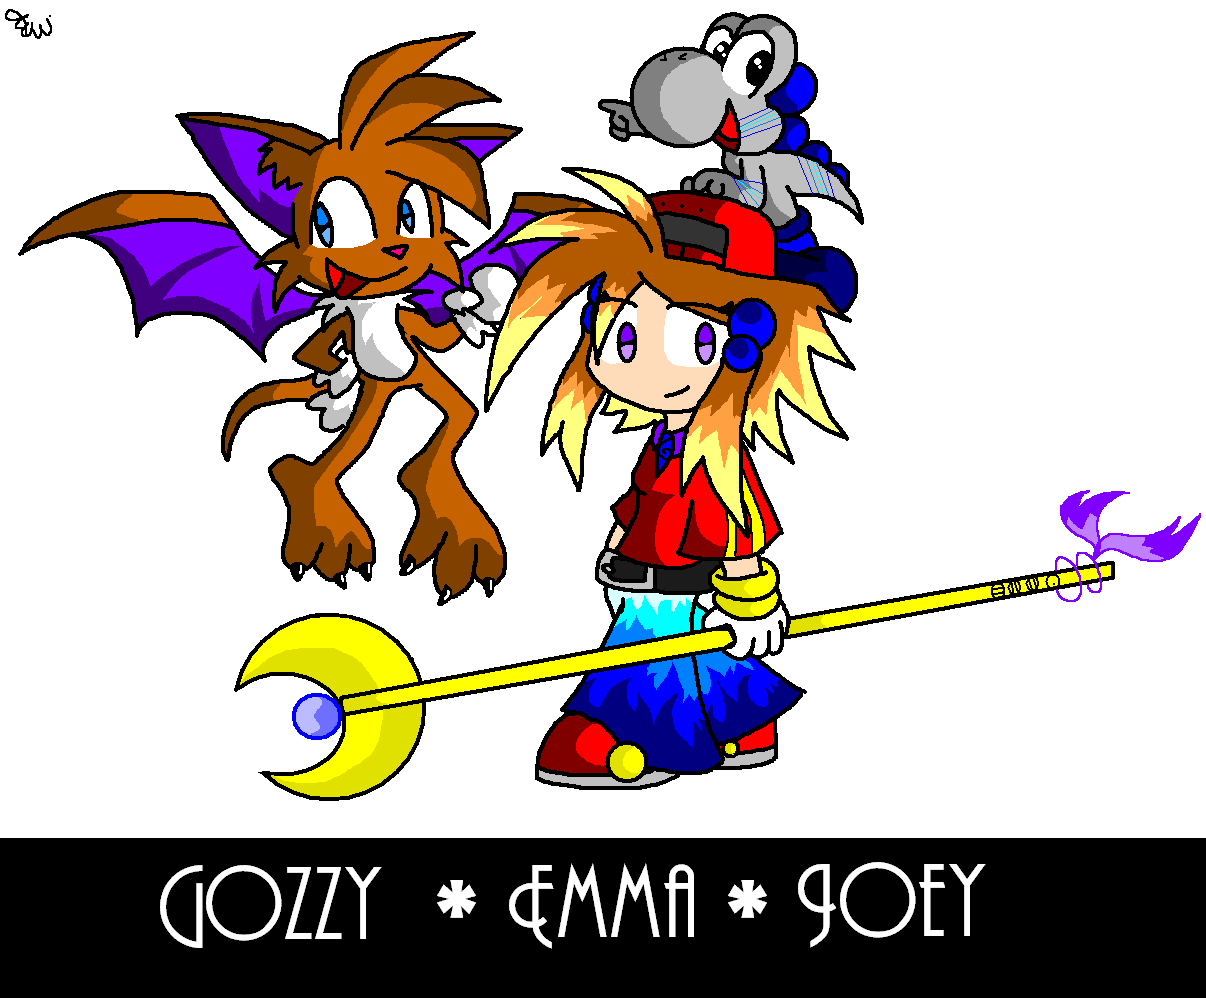 Me, Joey and Gozzy by Edge14